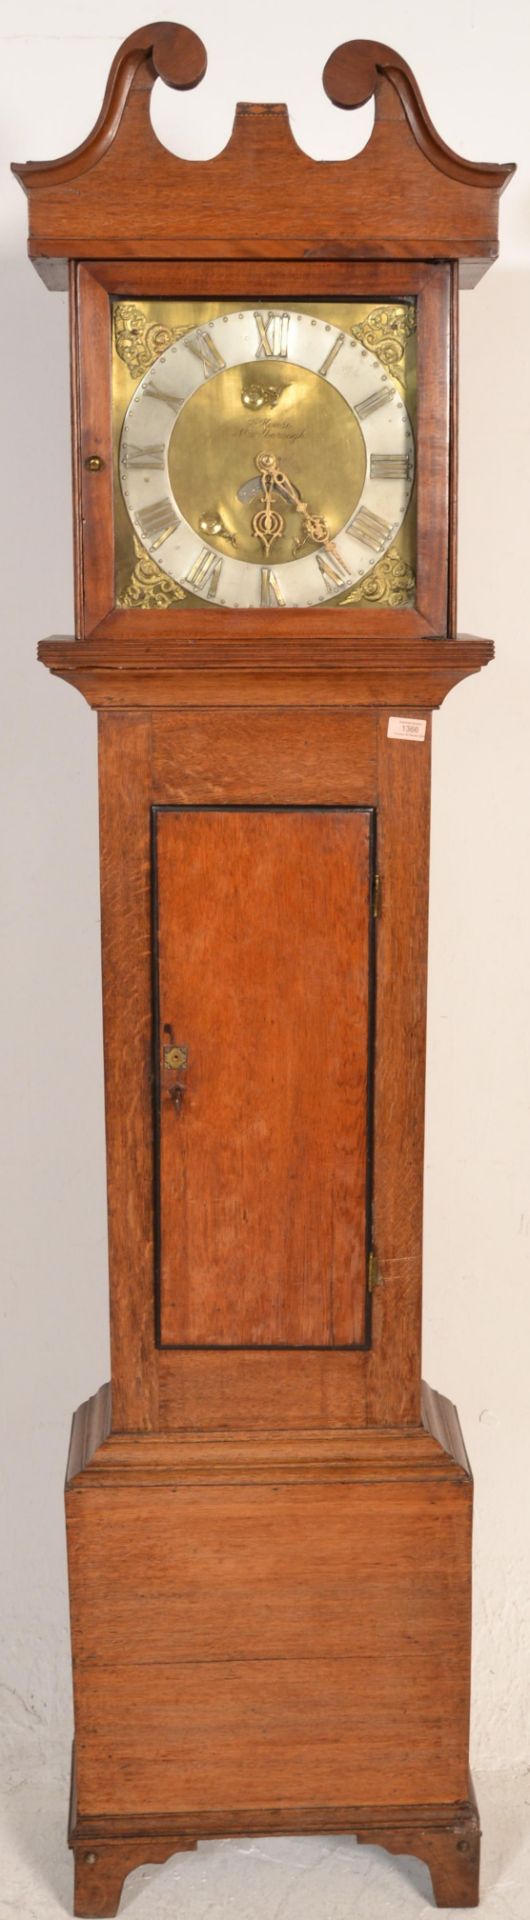 A 19th century West Country oak crossbanded brass faced longcase clock by A House of Marlborough.